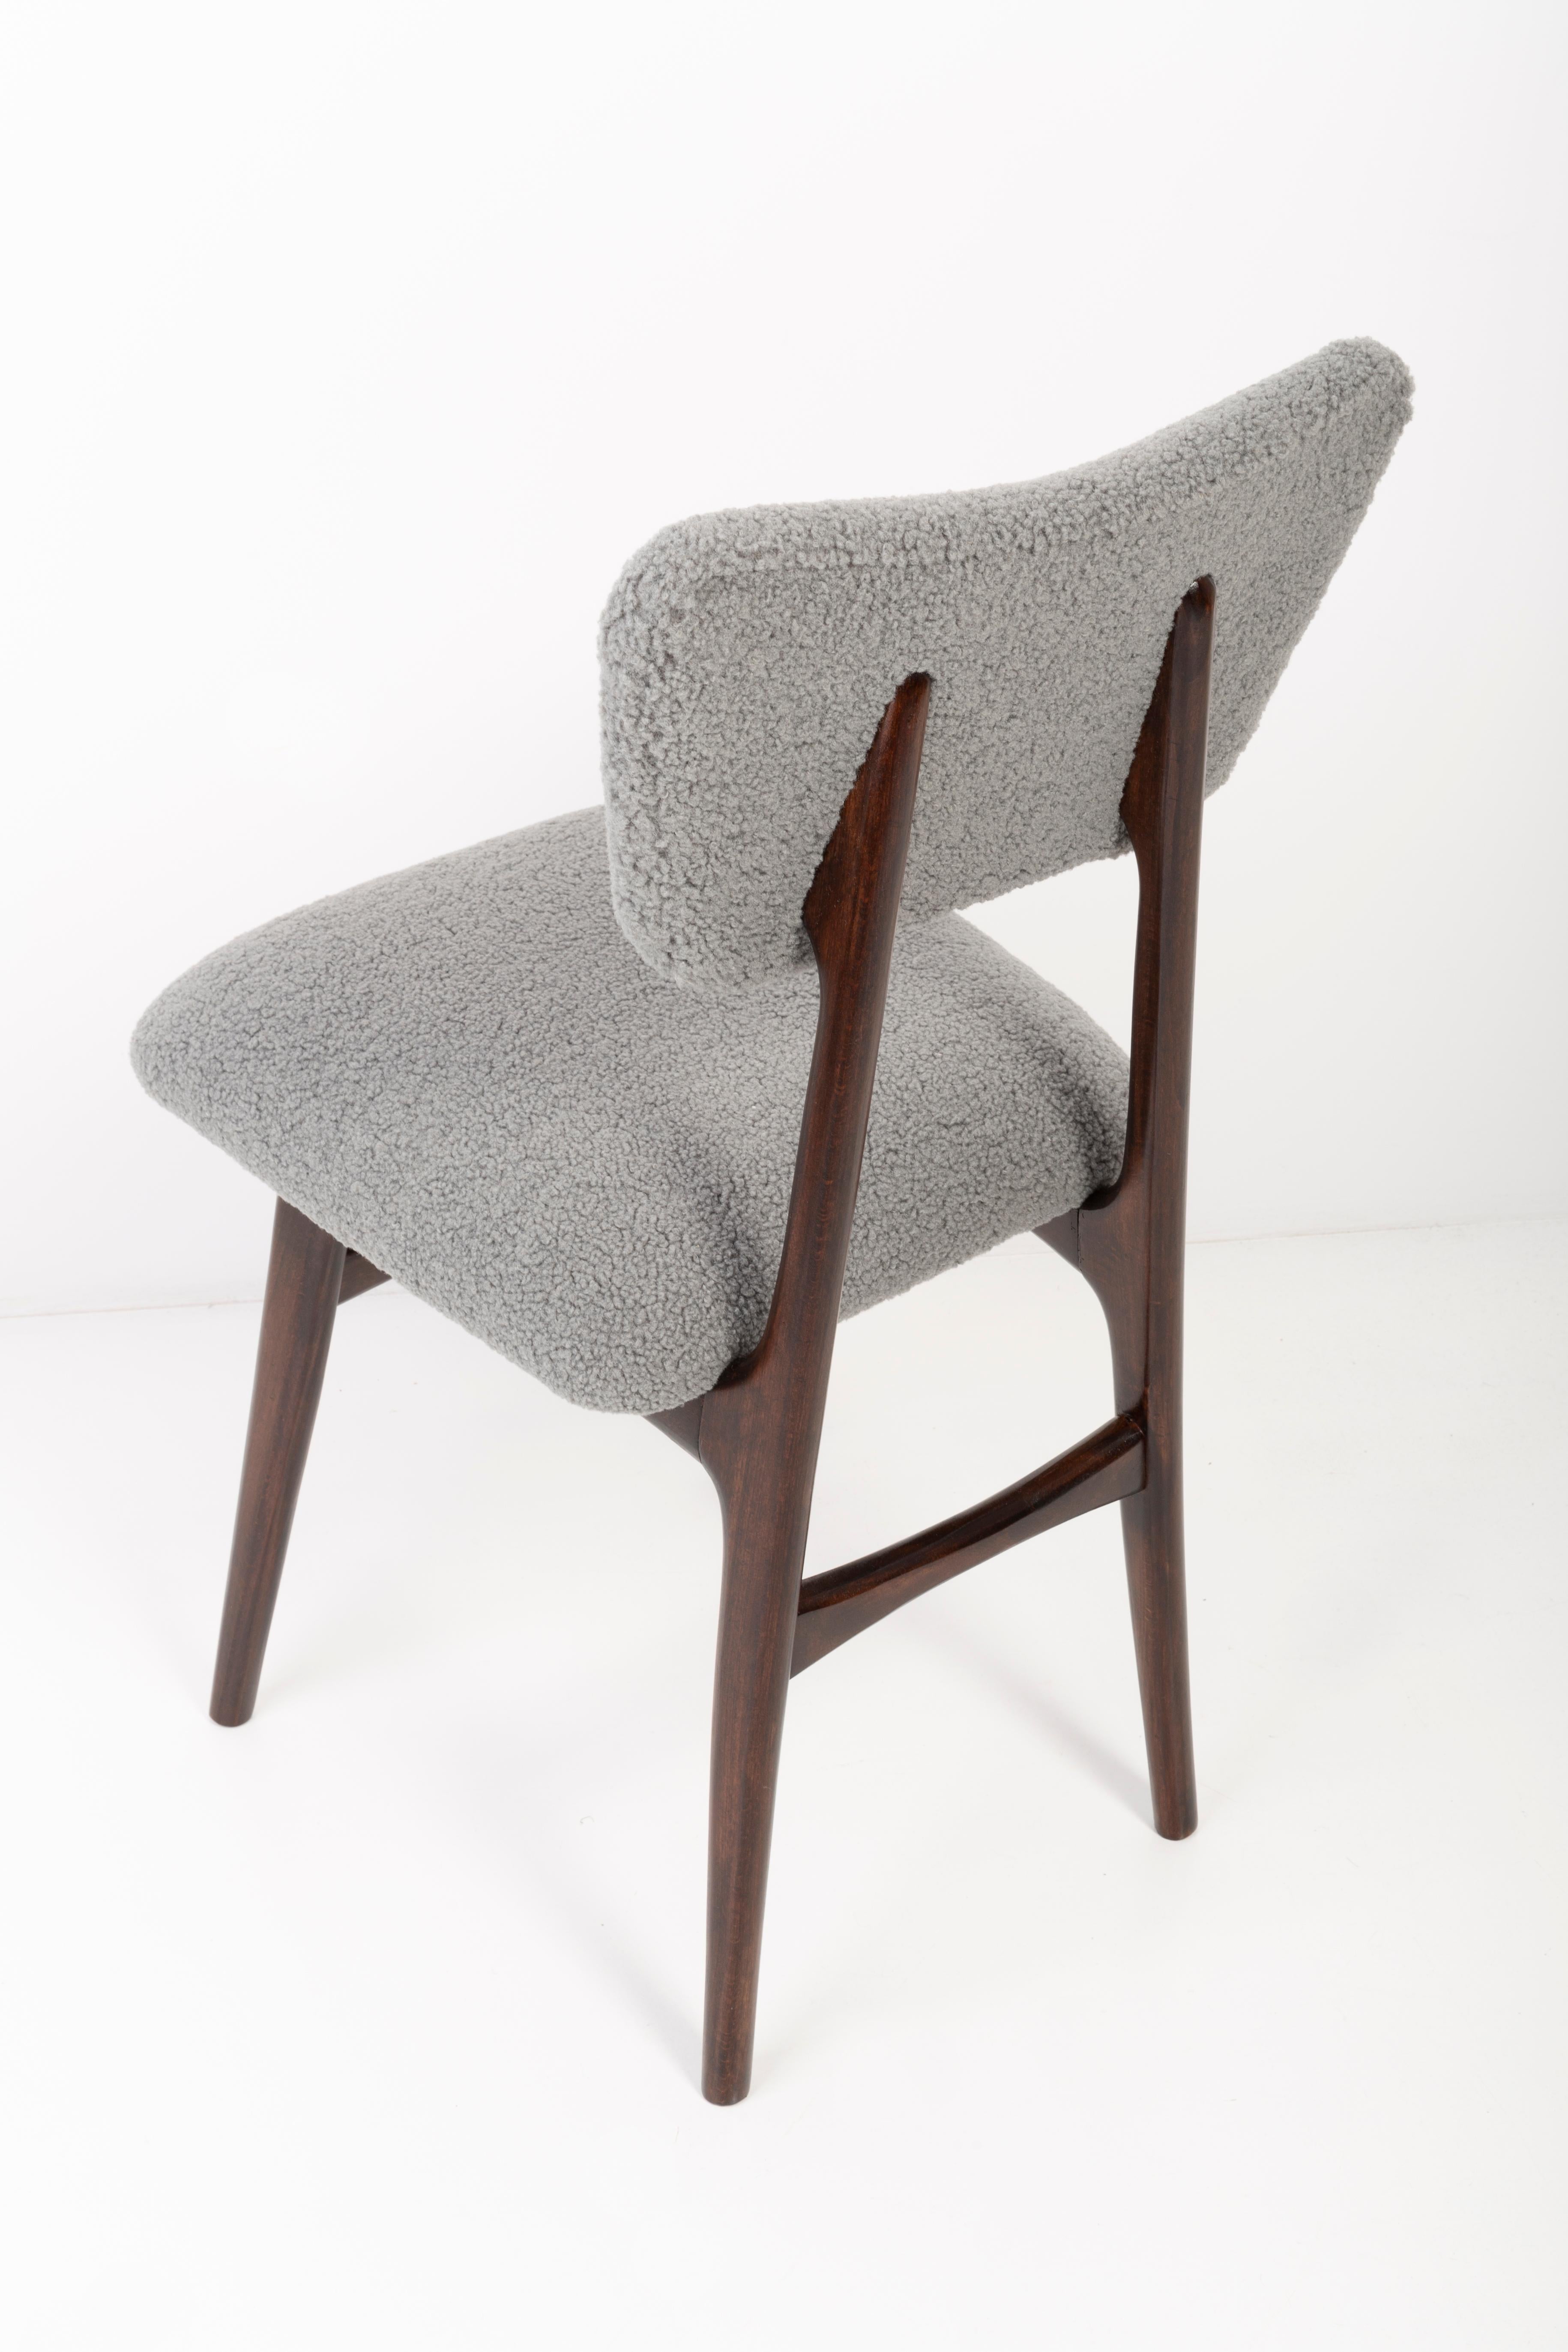 Two 20th Century Gray Boucle Chairs, 1960s For Sale 4